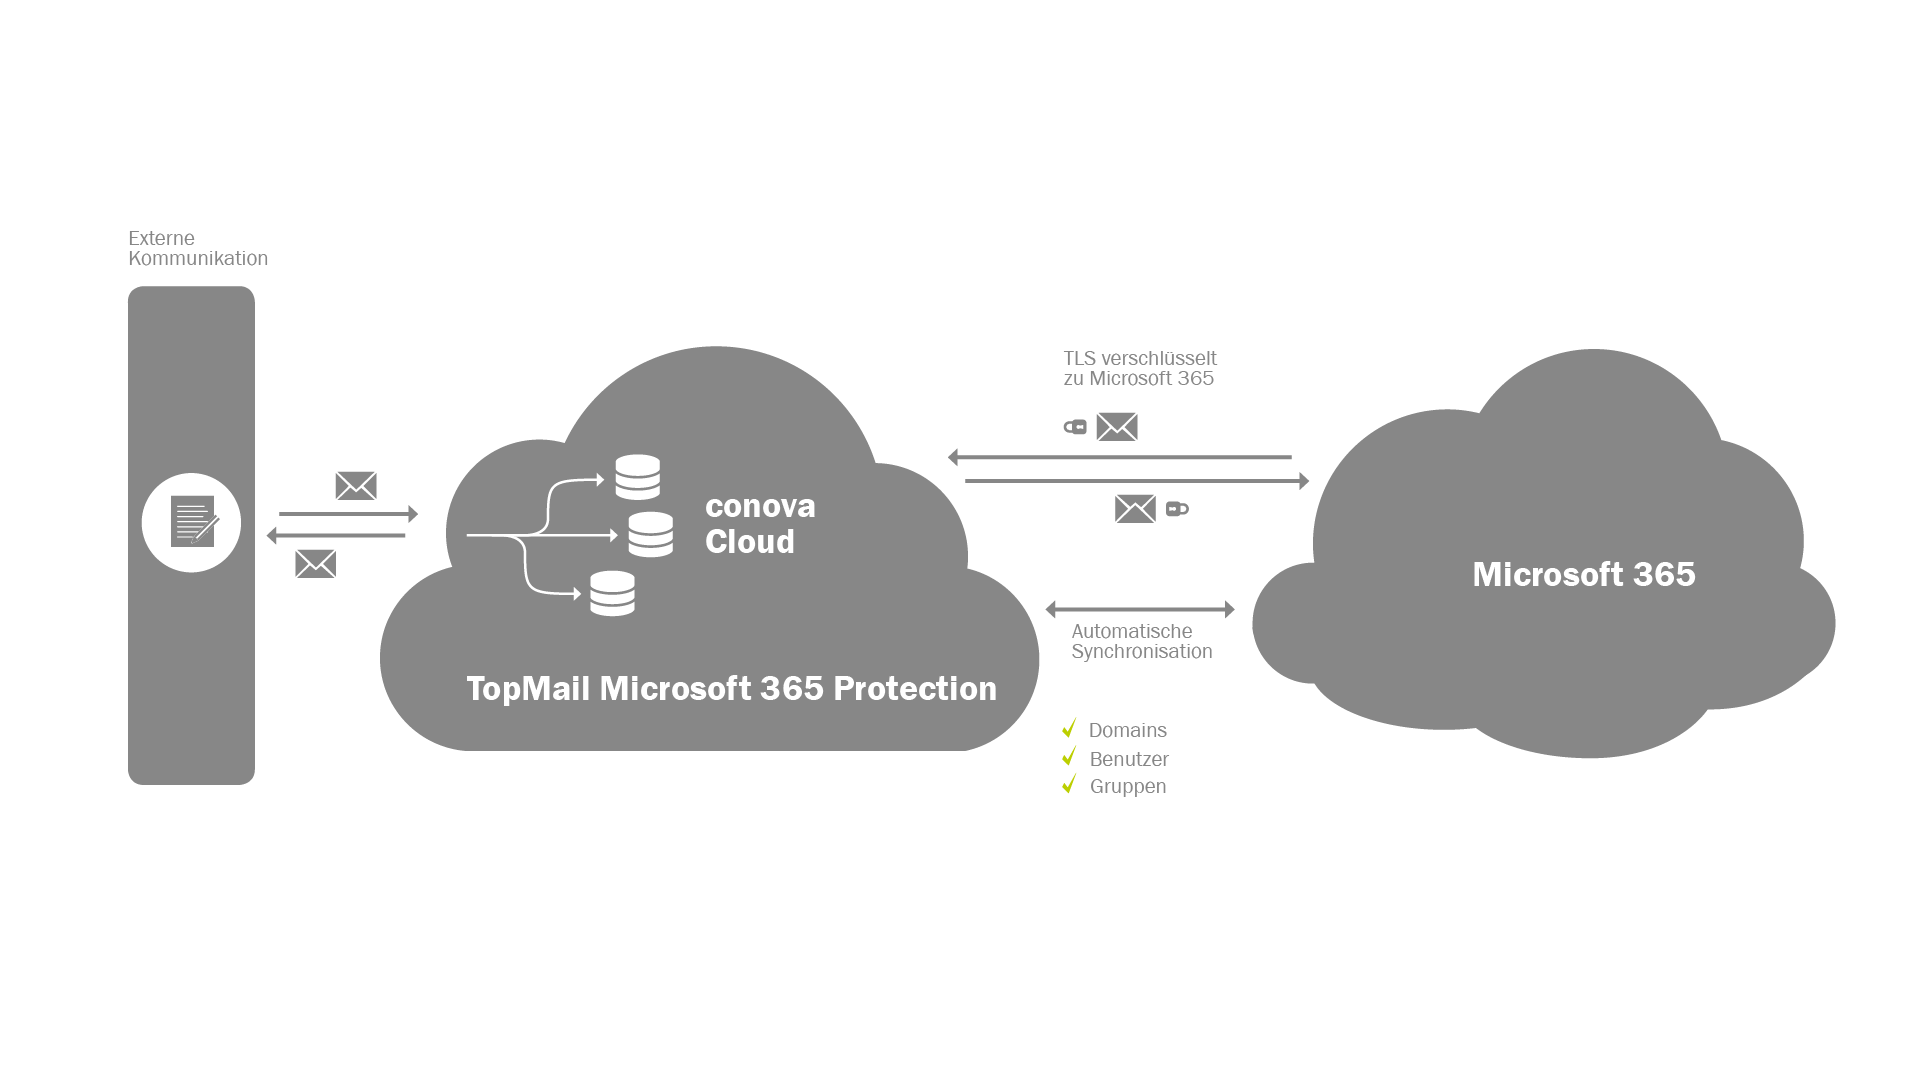 TopMail Microsoft 365 Protection